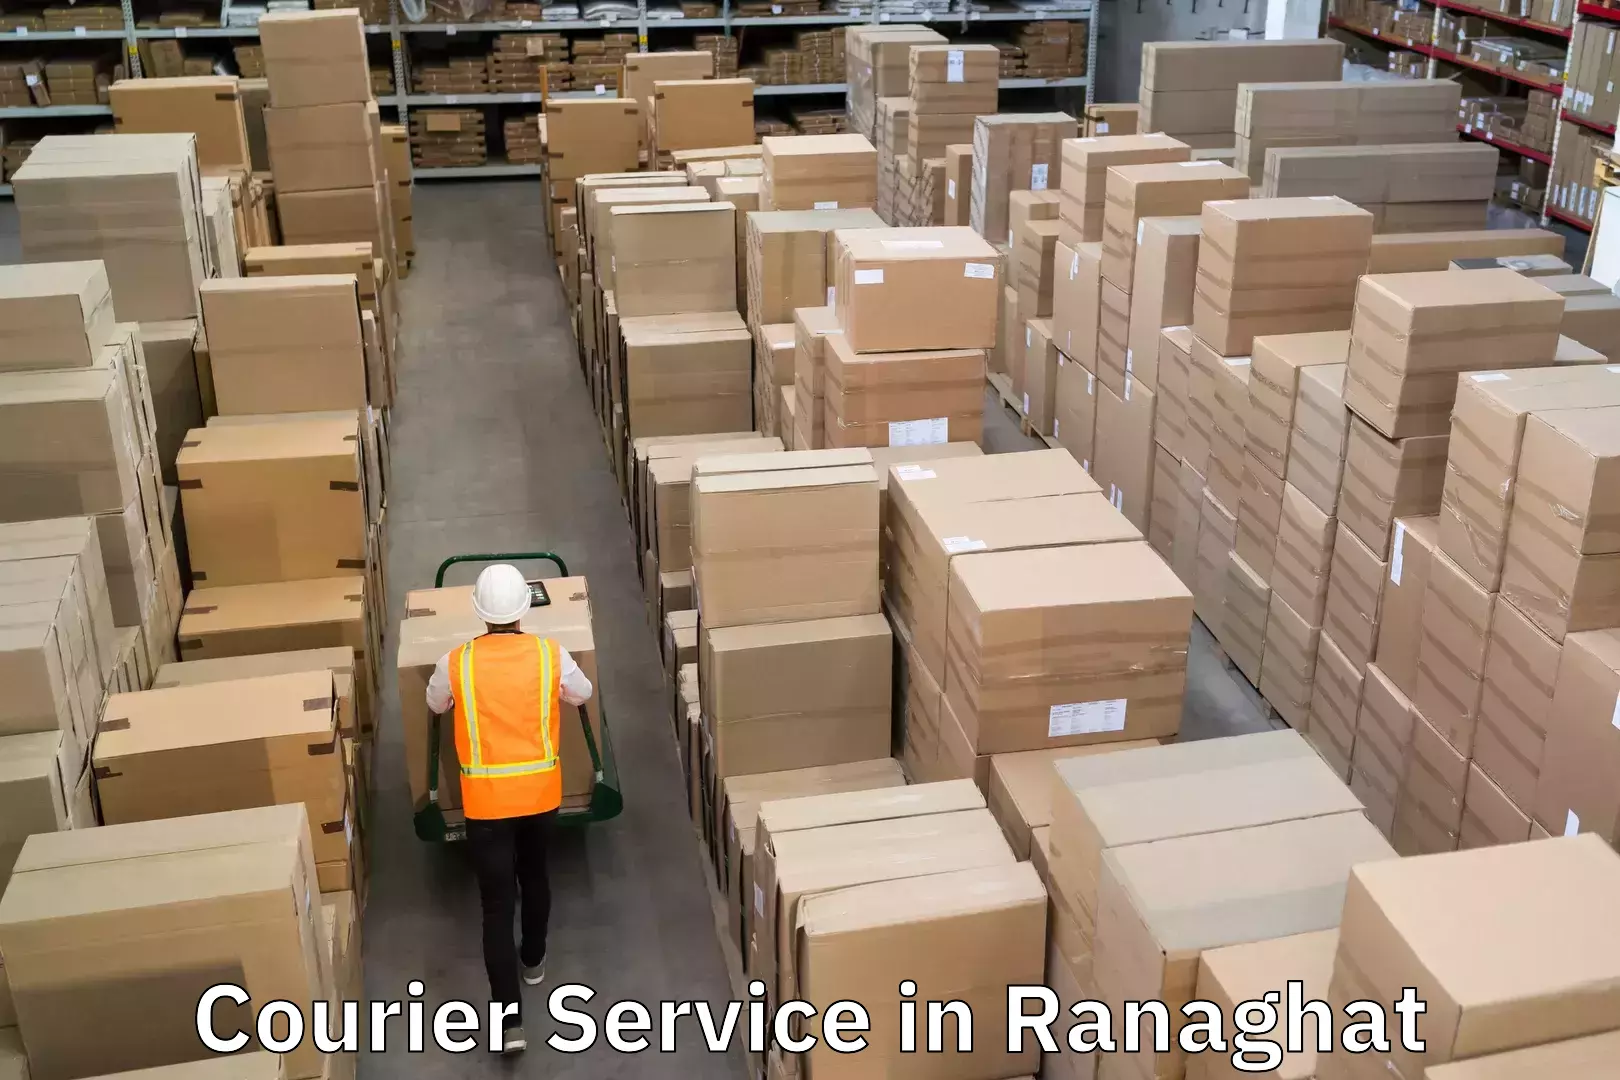 24/7 courier service in Ranaghat